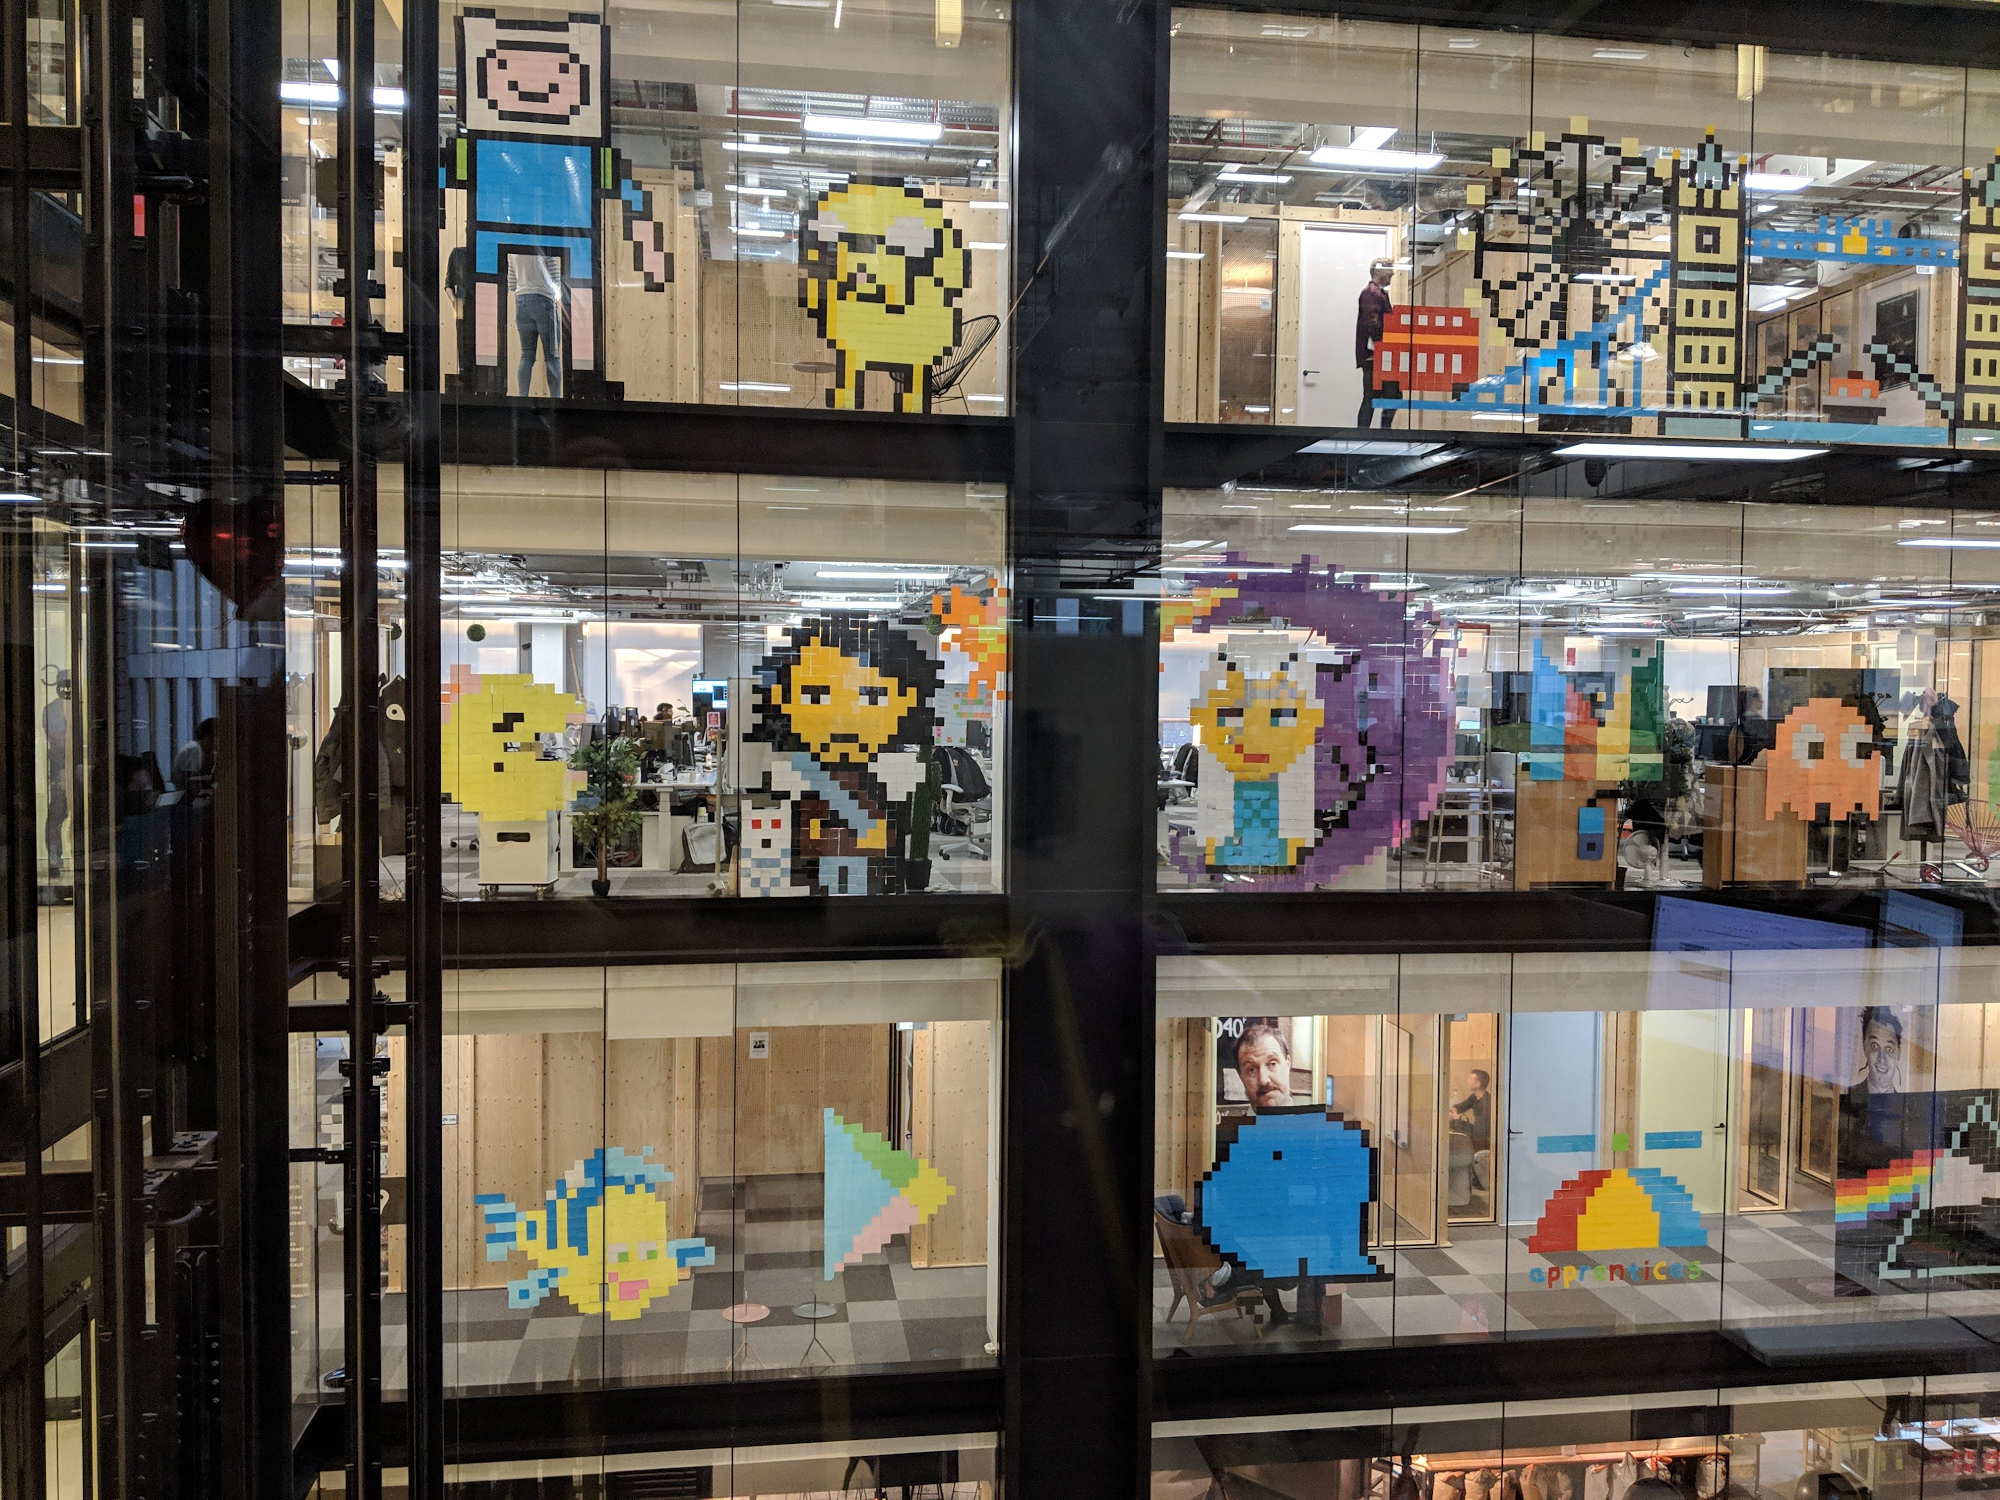 How a Google office became a sticky-note art gallery